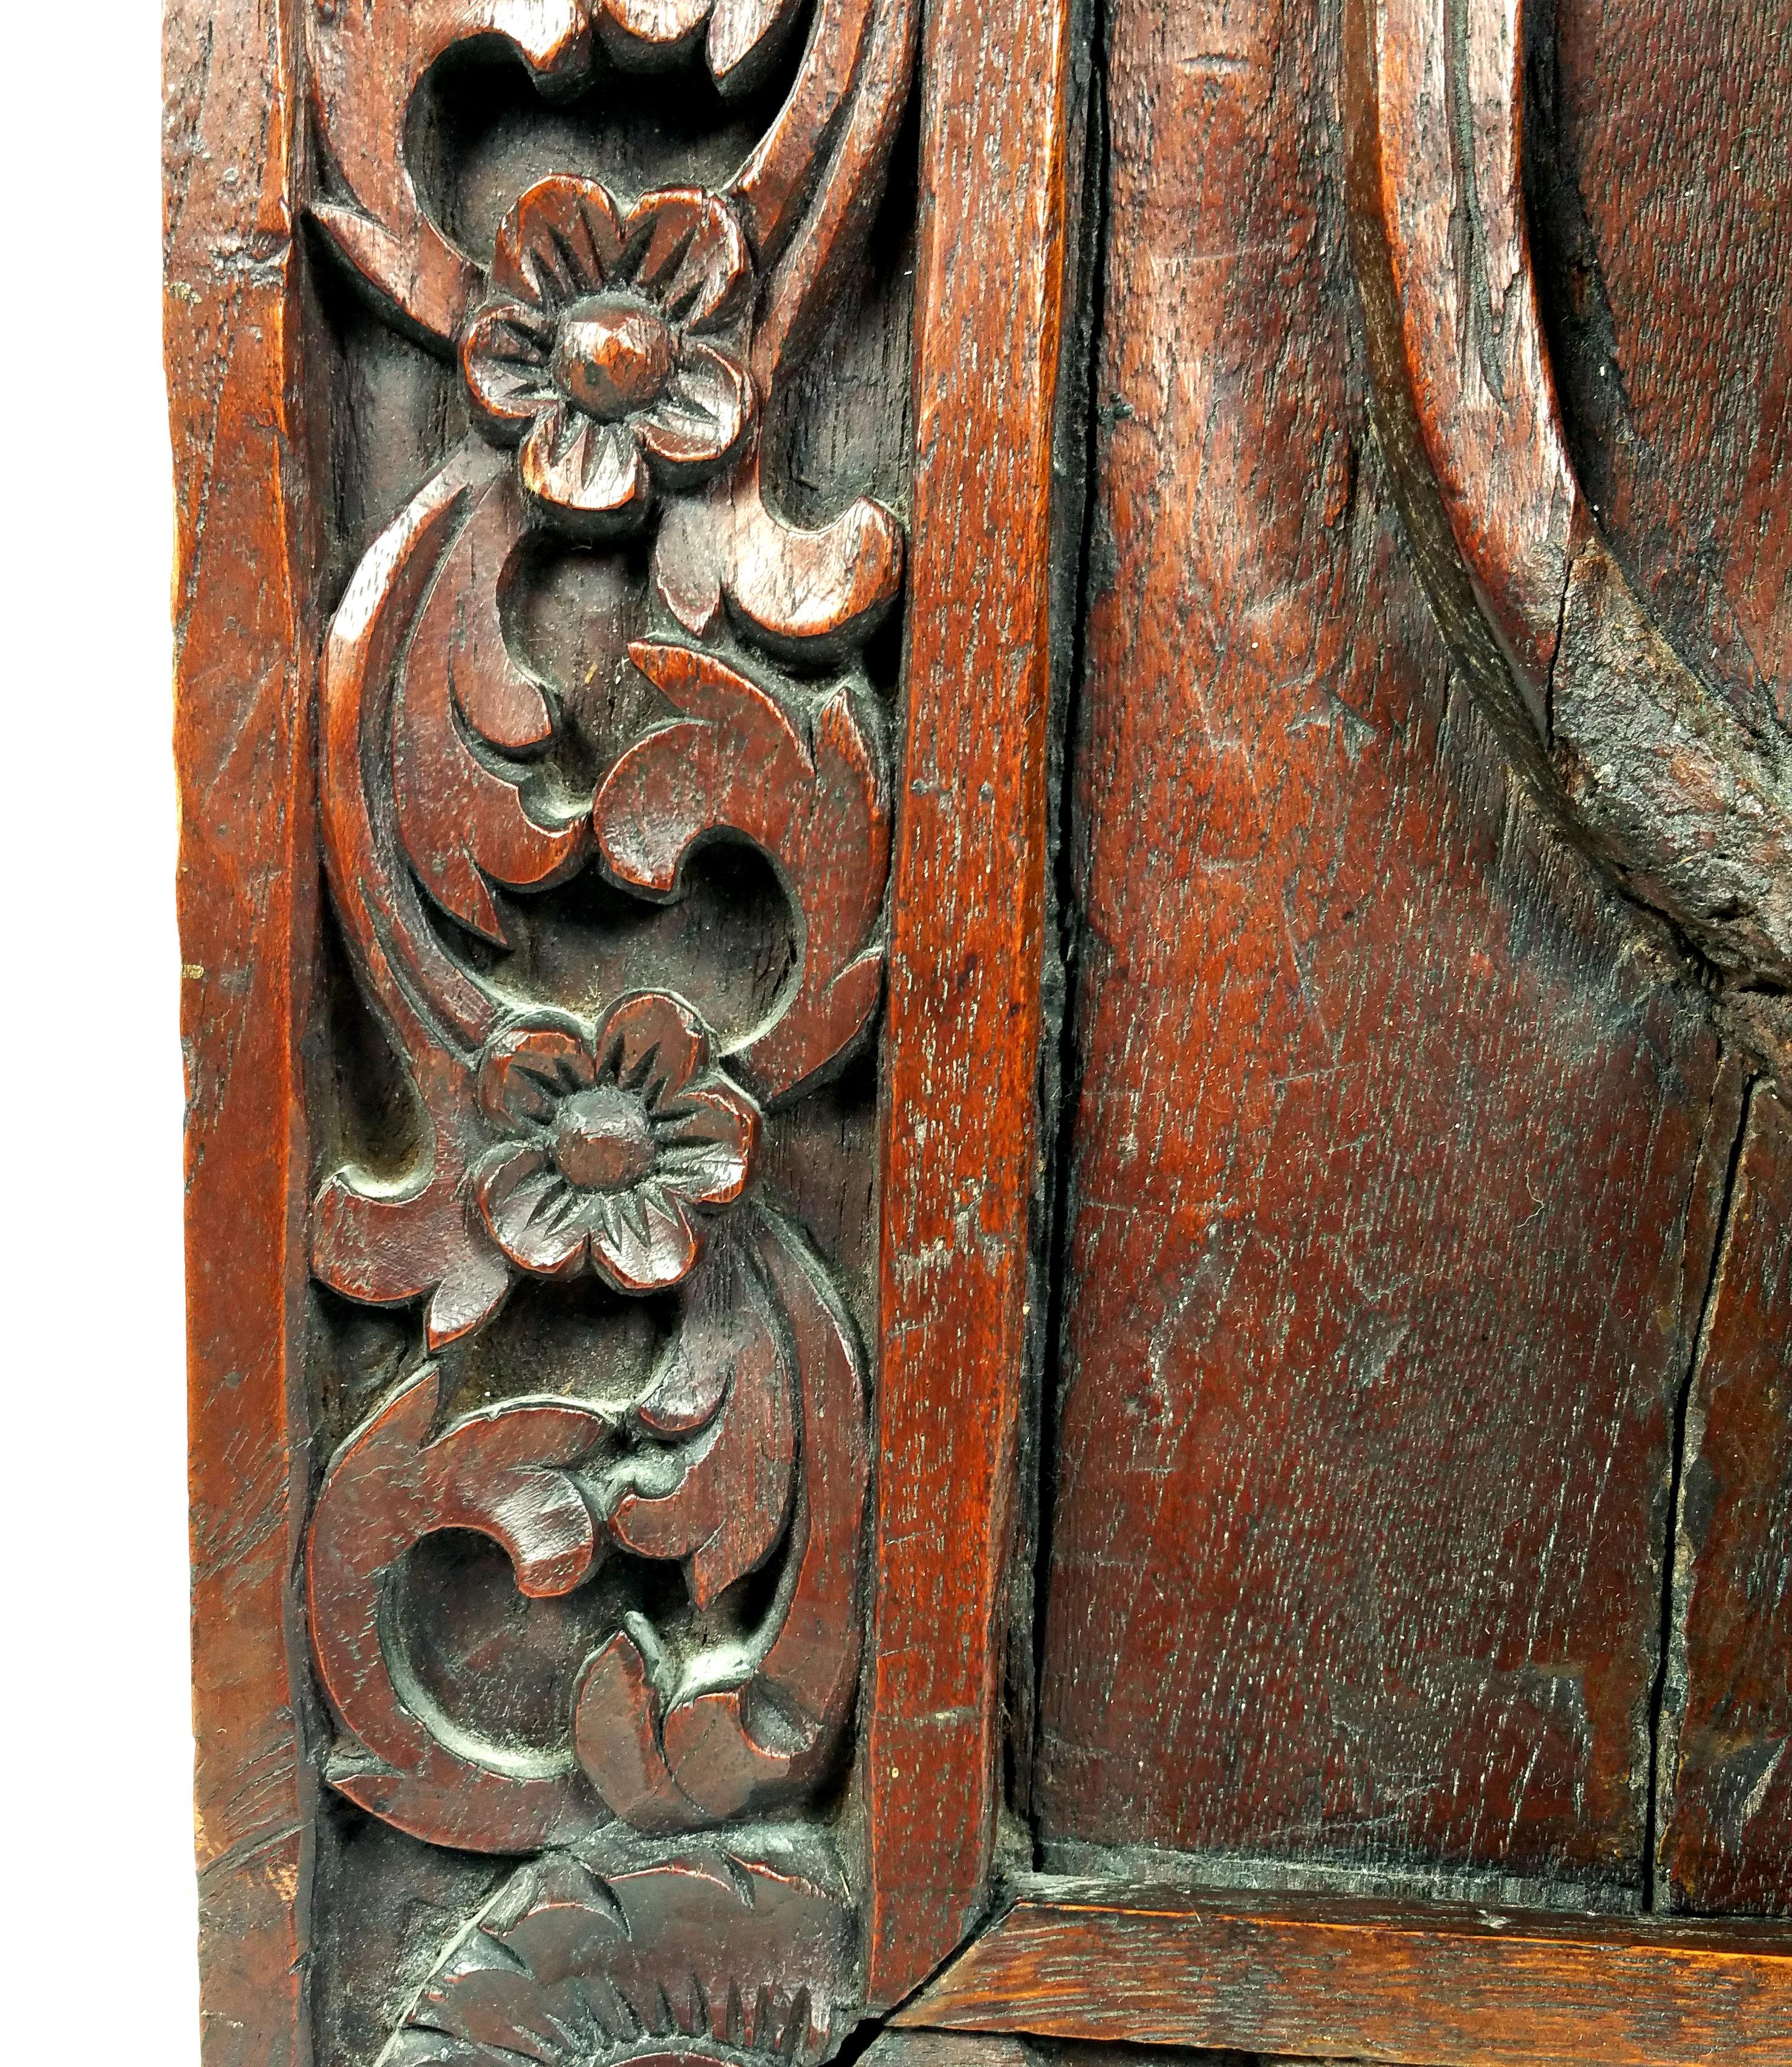 This marvellous and impressive 19th century. Tibetan carved hardwood wall panel depicts a monk holding a basket and surrounded by lotus flowers. It measures 26 in – 66 cm high by 17 ¾ - 45.1 cm wide, with a depth of 5 in – 12.7 cm. This unique and